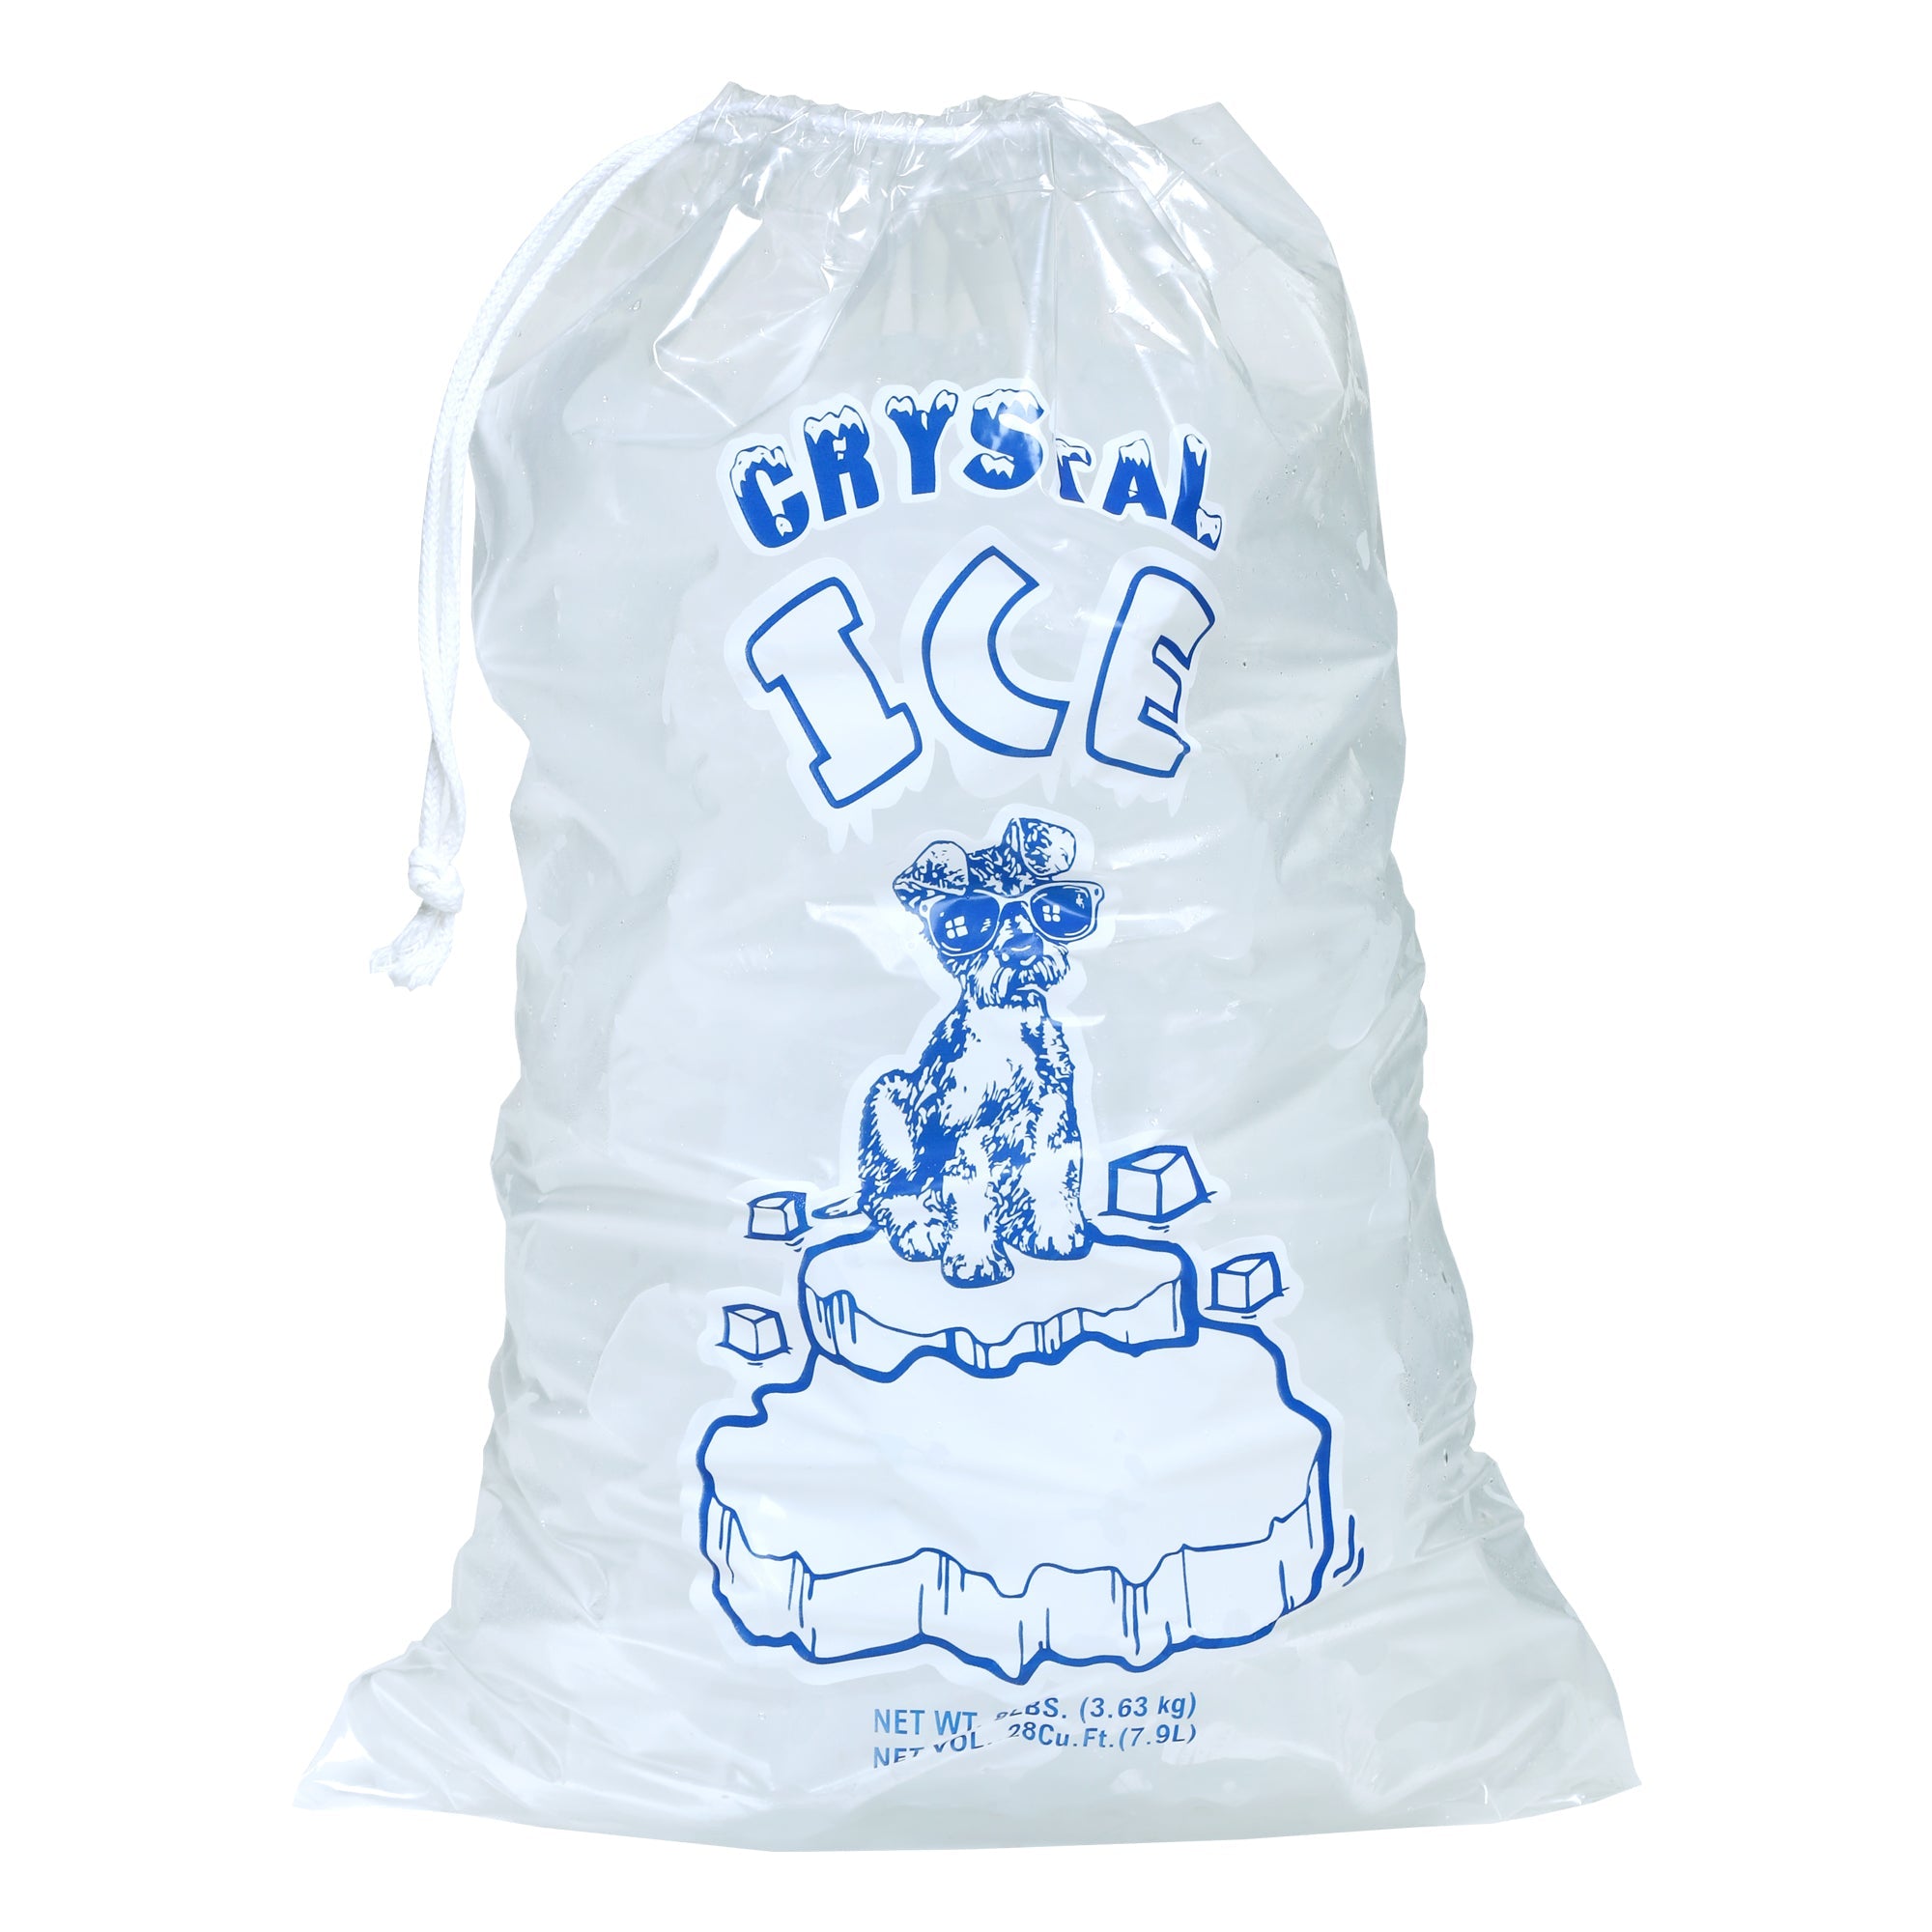 8 Lbs Ice Bags (Pack of 400) With Cotton Drawstring - Infinite Pack